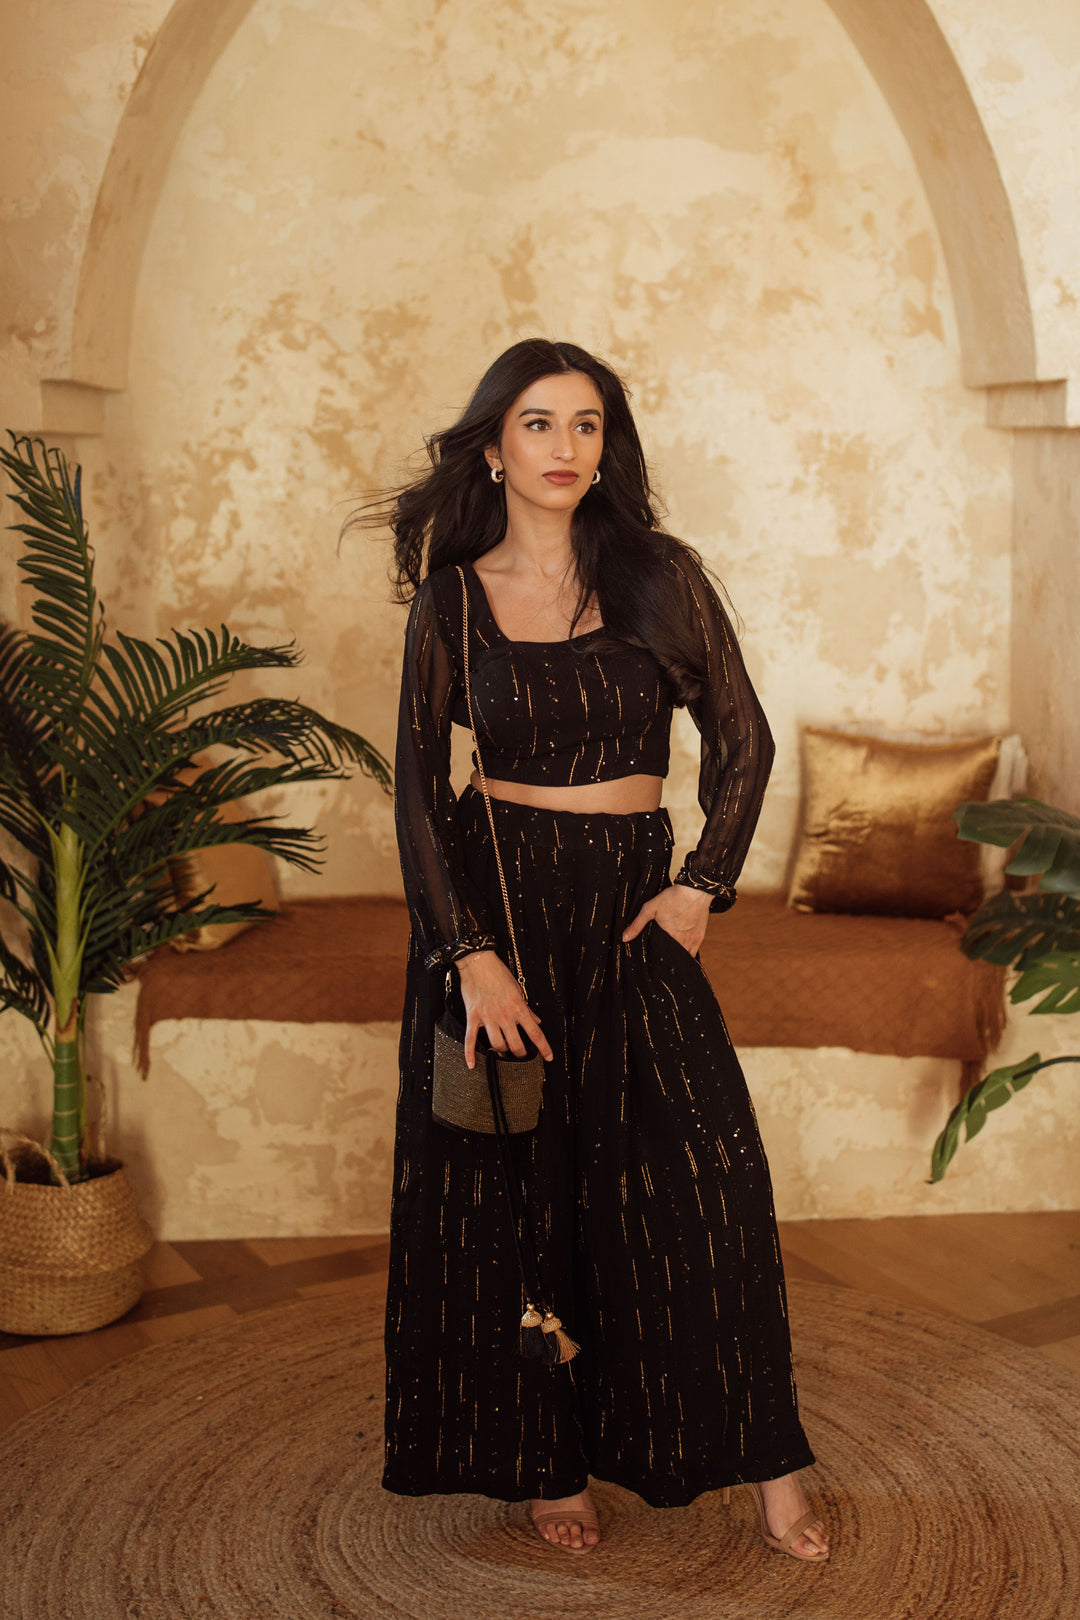 Women's Fusion Wear in UAE - The Perfect Blend of Fashion and Style